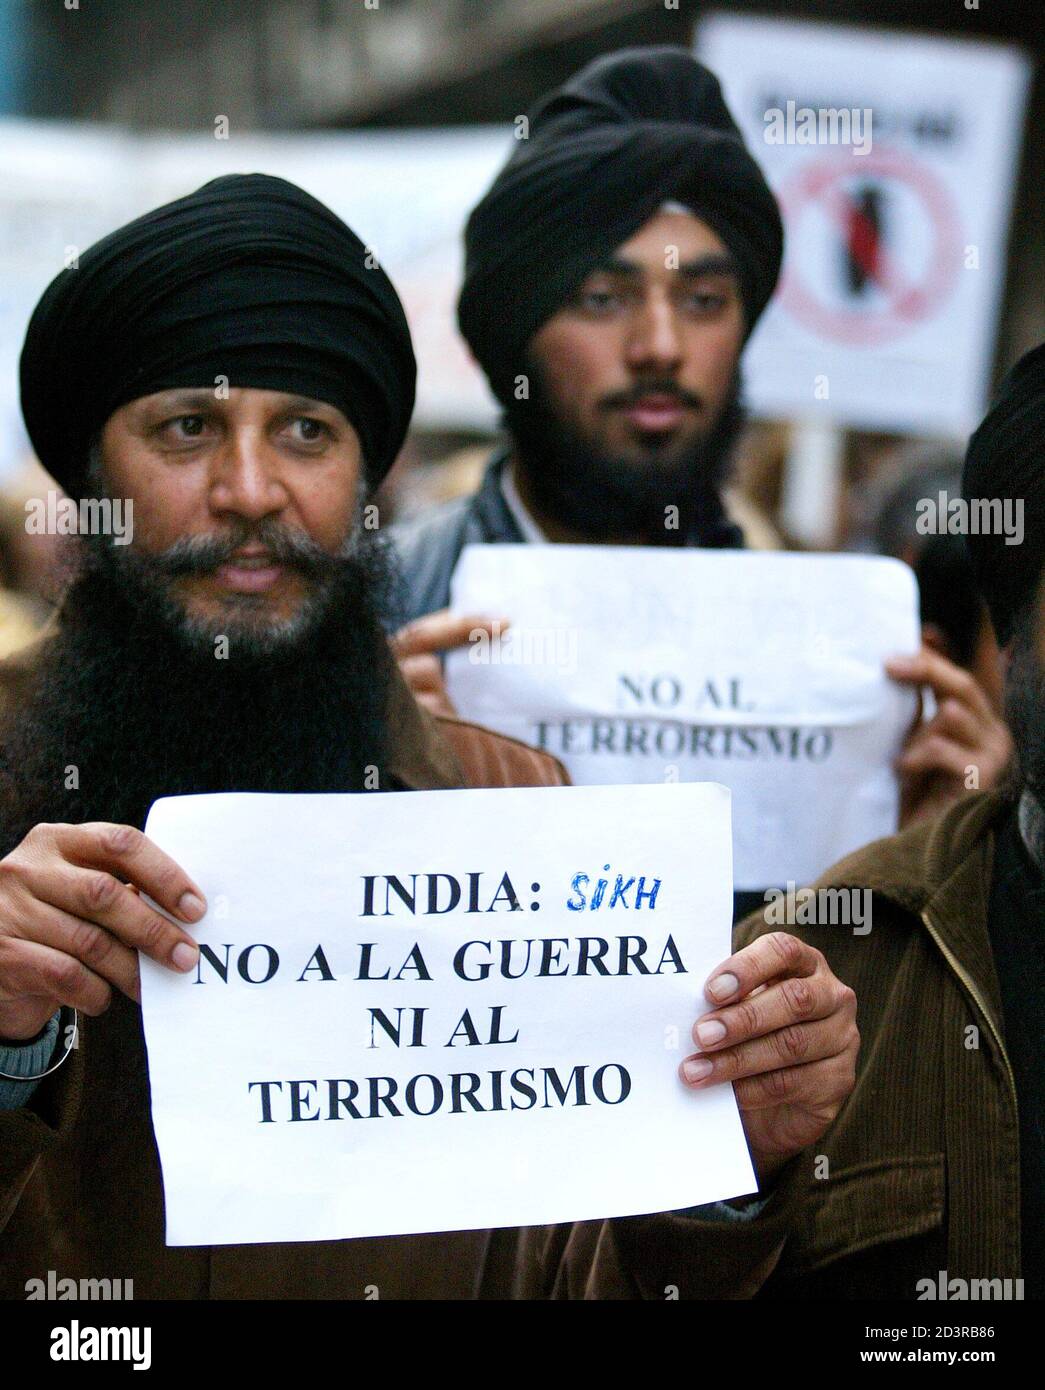 Members of the Indian community living in Catalonia take part in an anti-war march in central Barcelona on the first anniversary of the start of war in Iraq, March 20, 2004. Worldwide protests marked the anniversary of the war in Iraq on Saturday as tens of thousands demanded the U.S.-led coalition pull its troops out of the country scarred by a year of war and insurrection. REUTERS/ Victor Fraile  GN/CRB Stock Photo